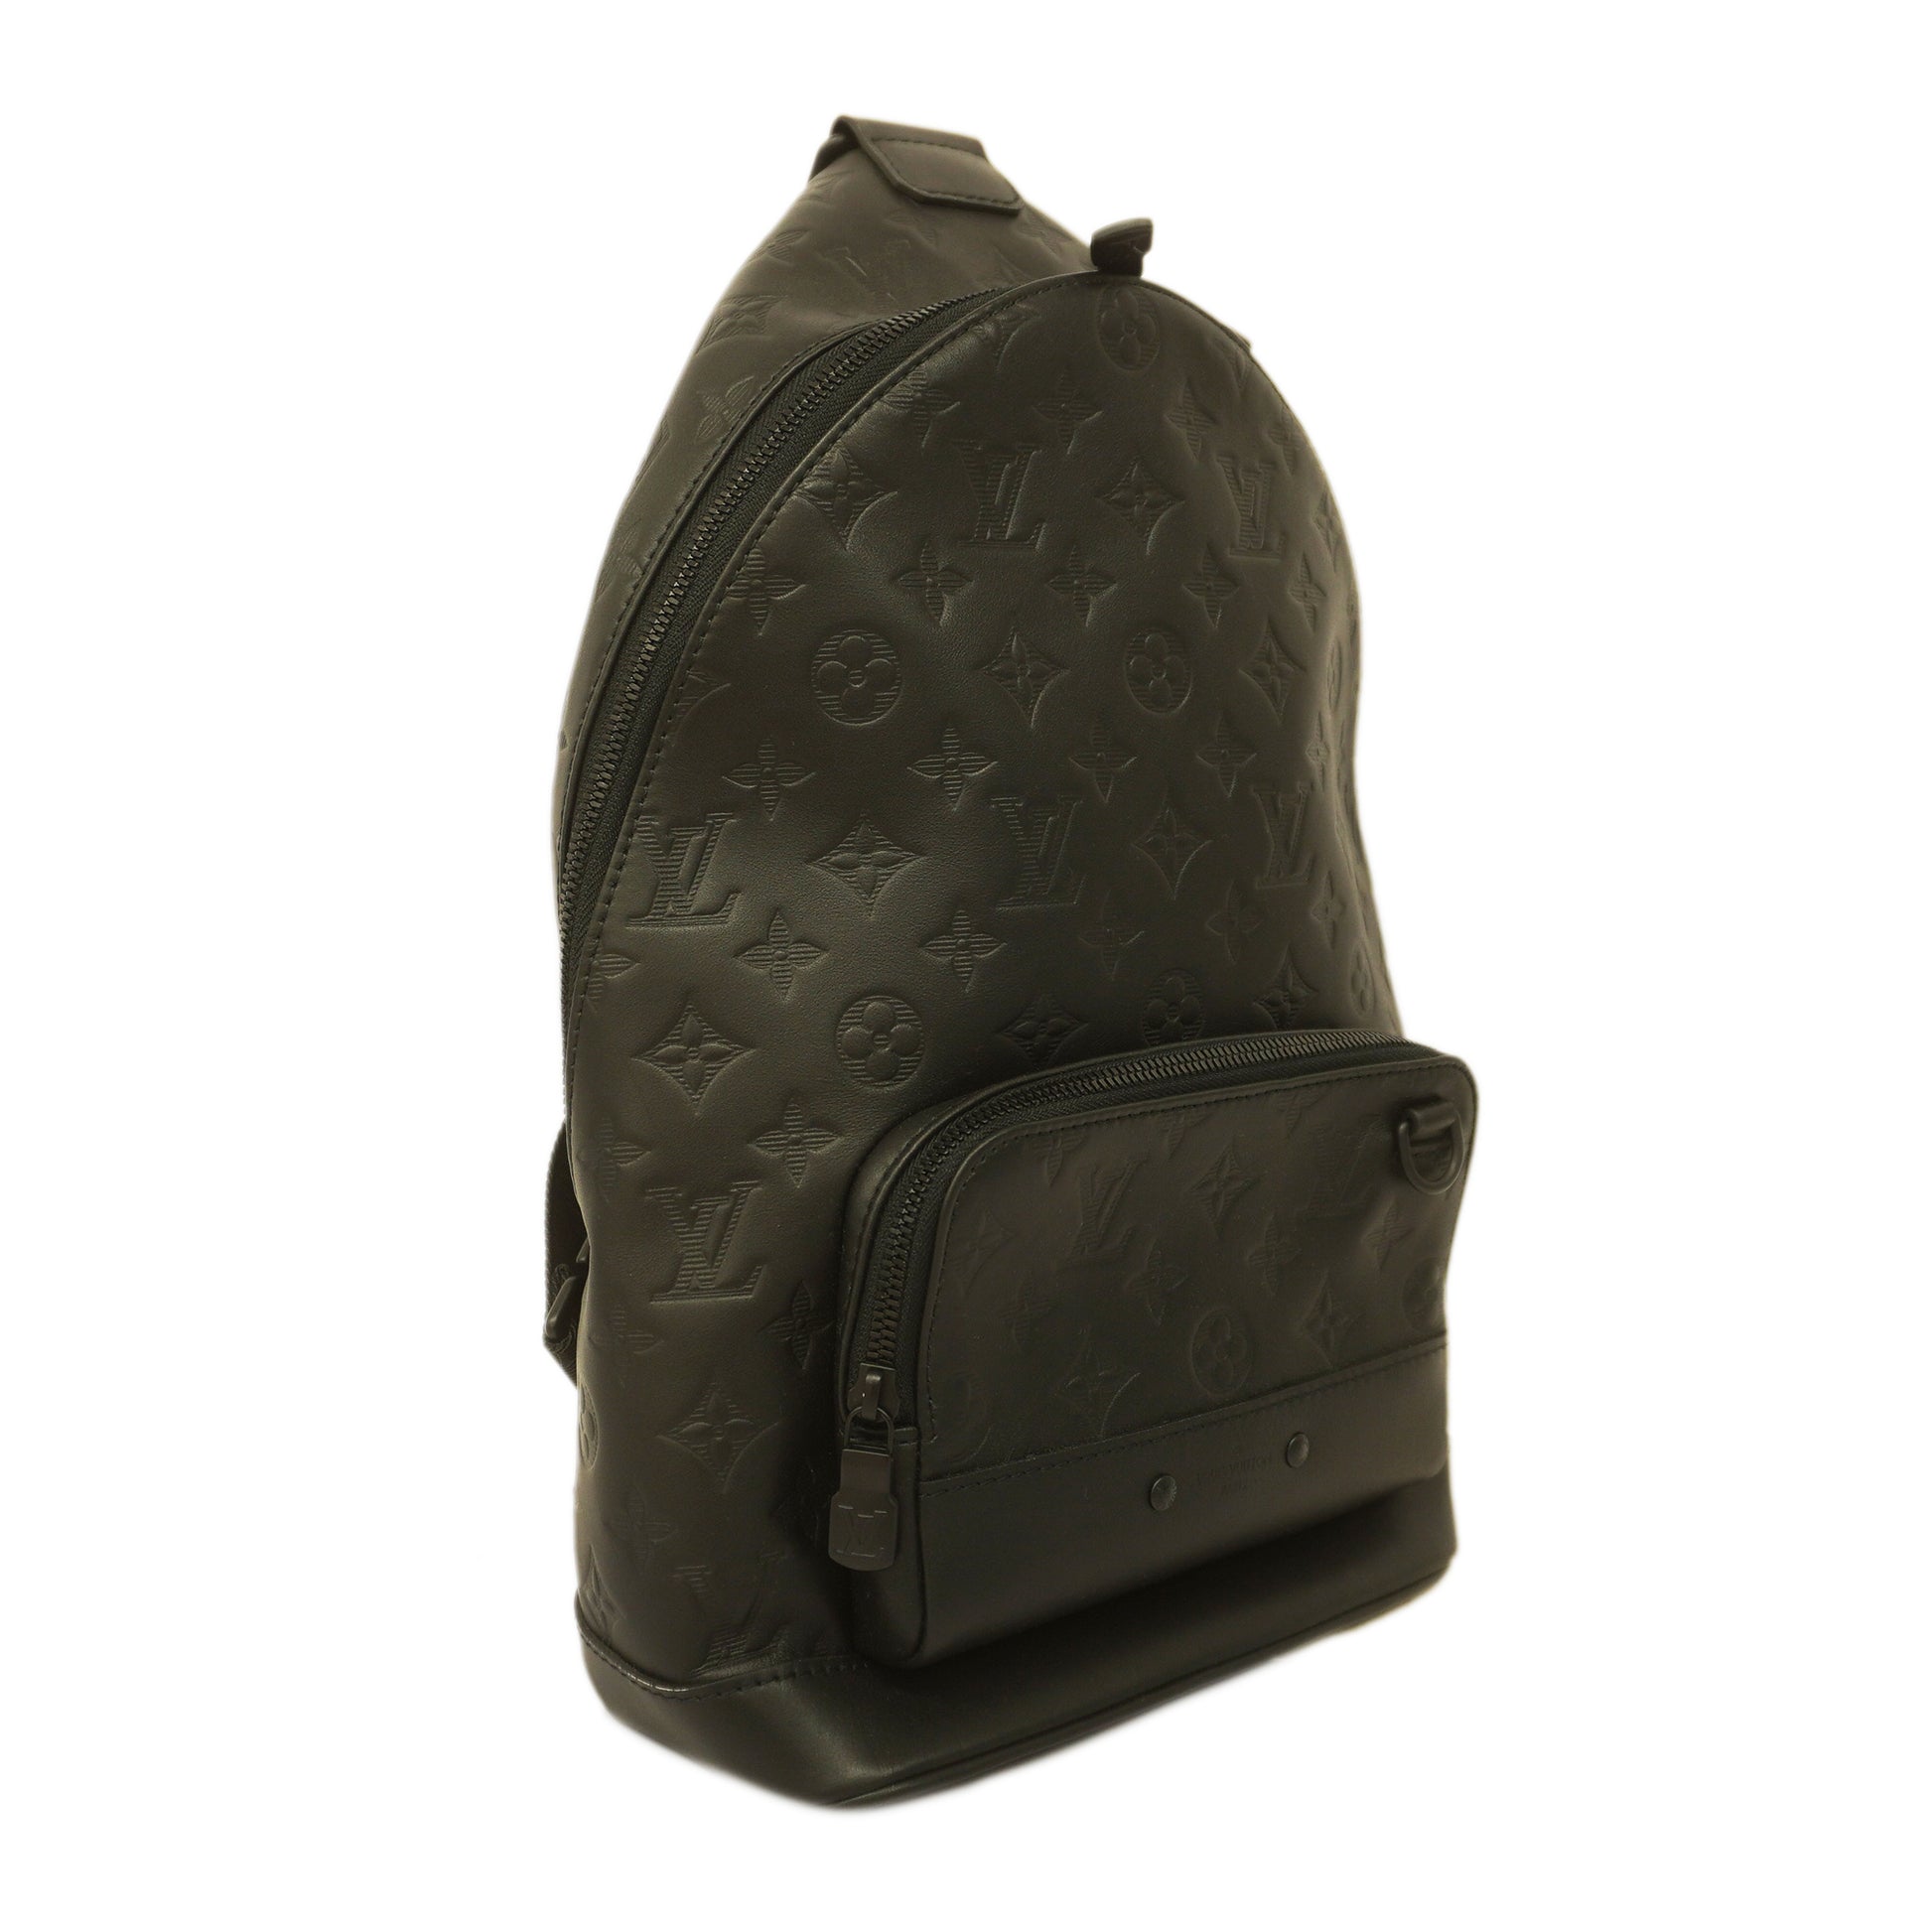 LOUIS VUITTON RACER BACKPACK MONOGRAM SHADOW GRAY LEATHER Good